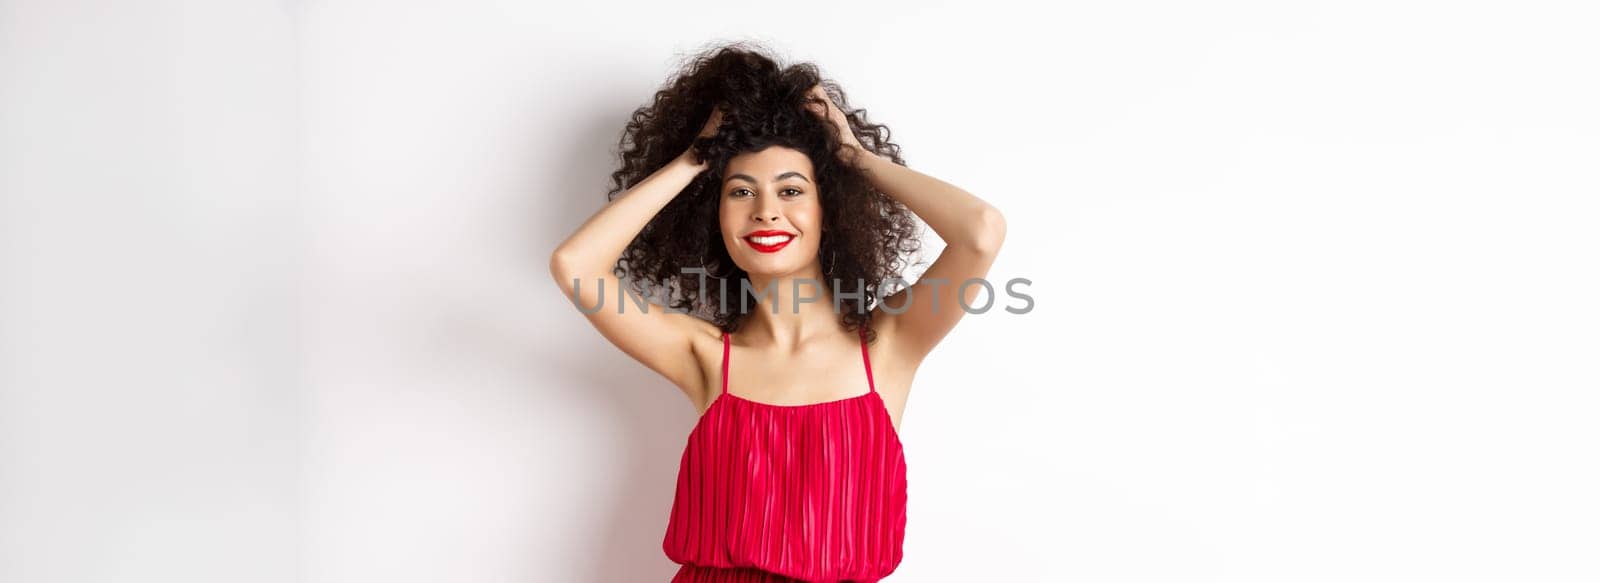 Beauty and fashion. Carefree woman in red dress and makeup, touching curly hair and smiling happy, standing on white background.